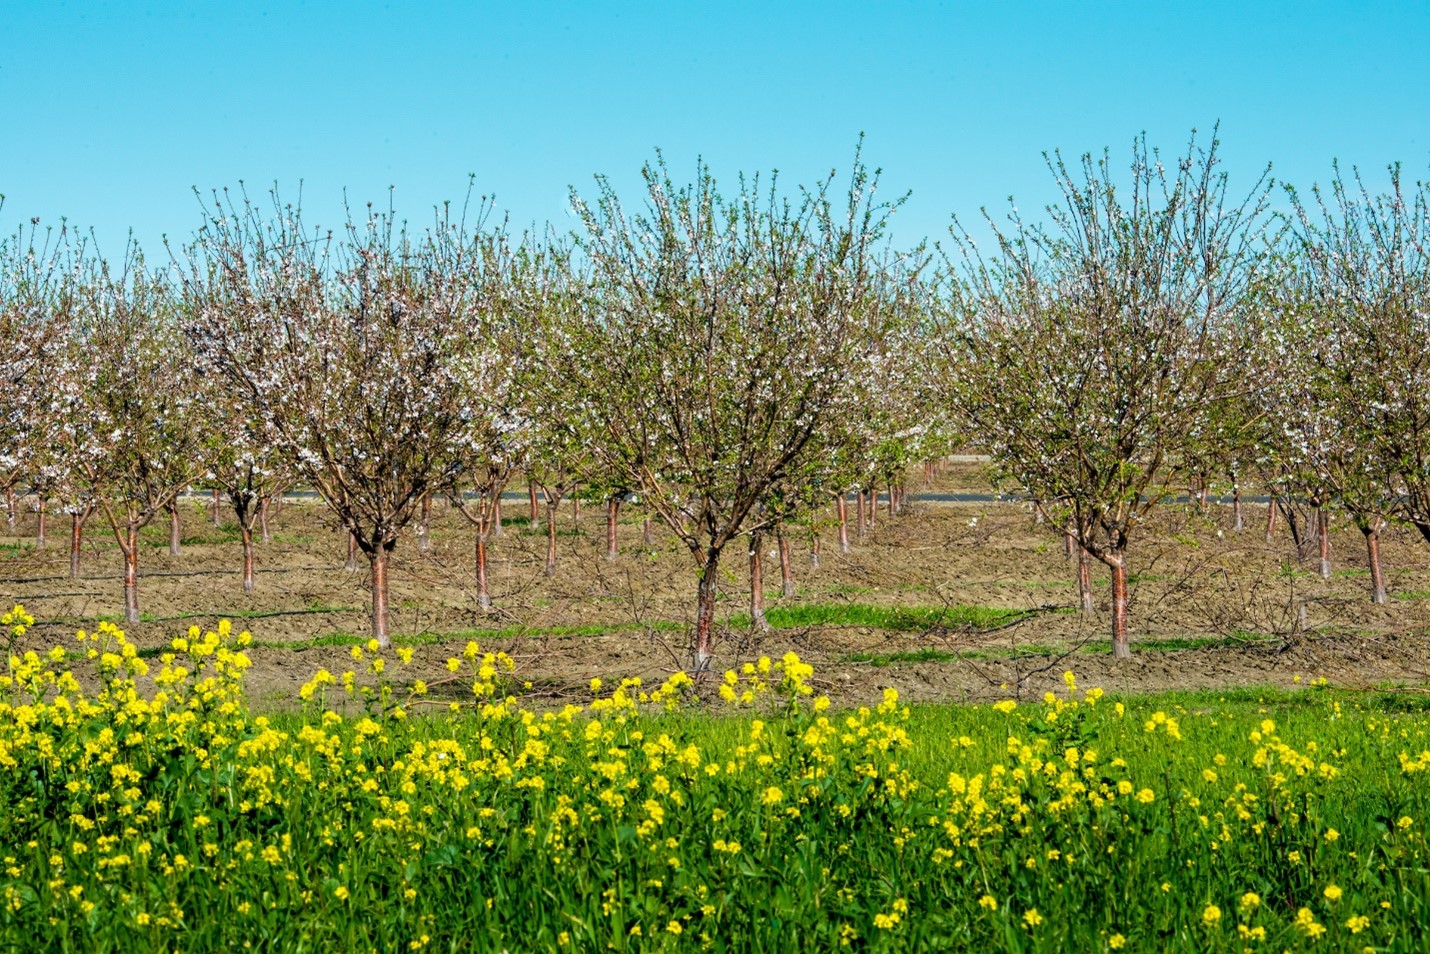 An alond orchard in spring.  Trees are just budding and a bright yellow patch of mustard flowers is edging the orchard